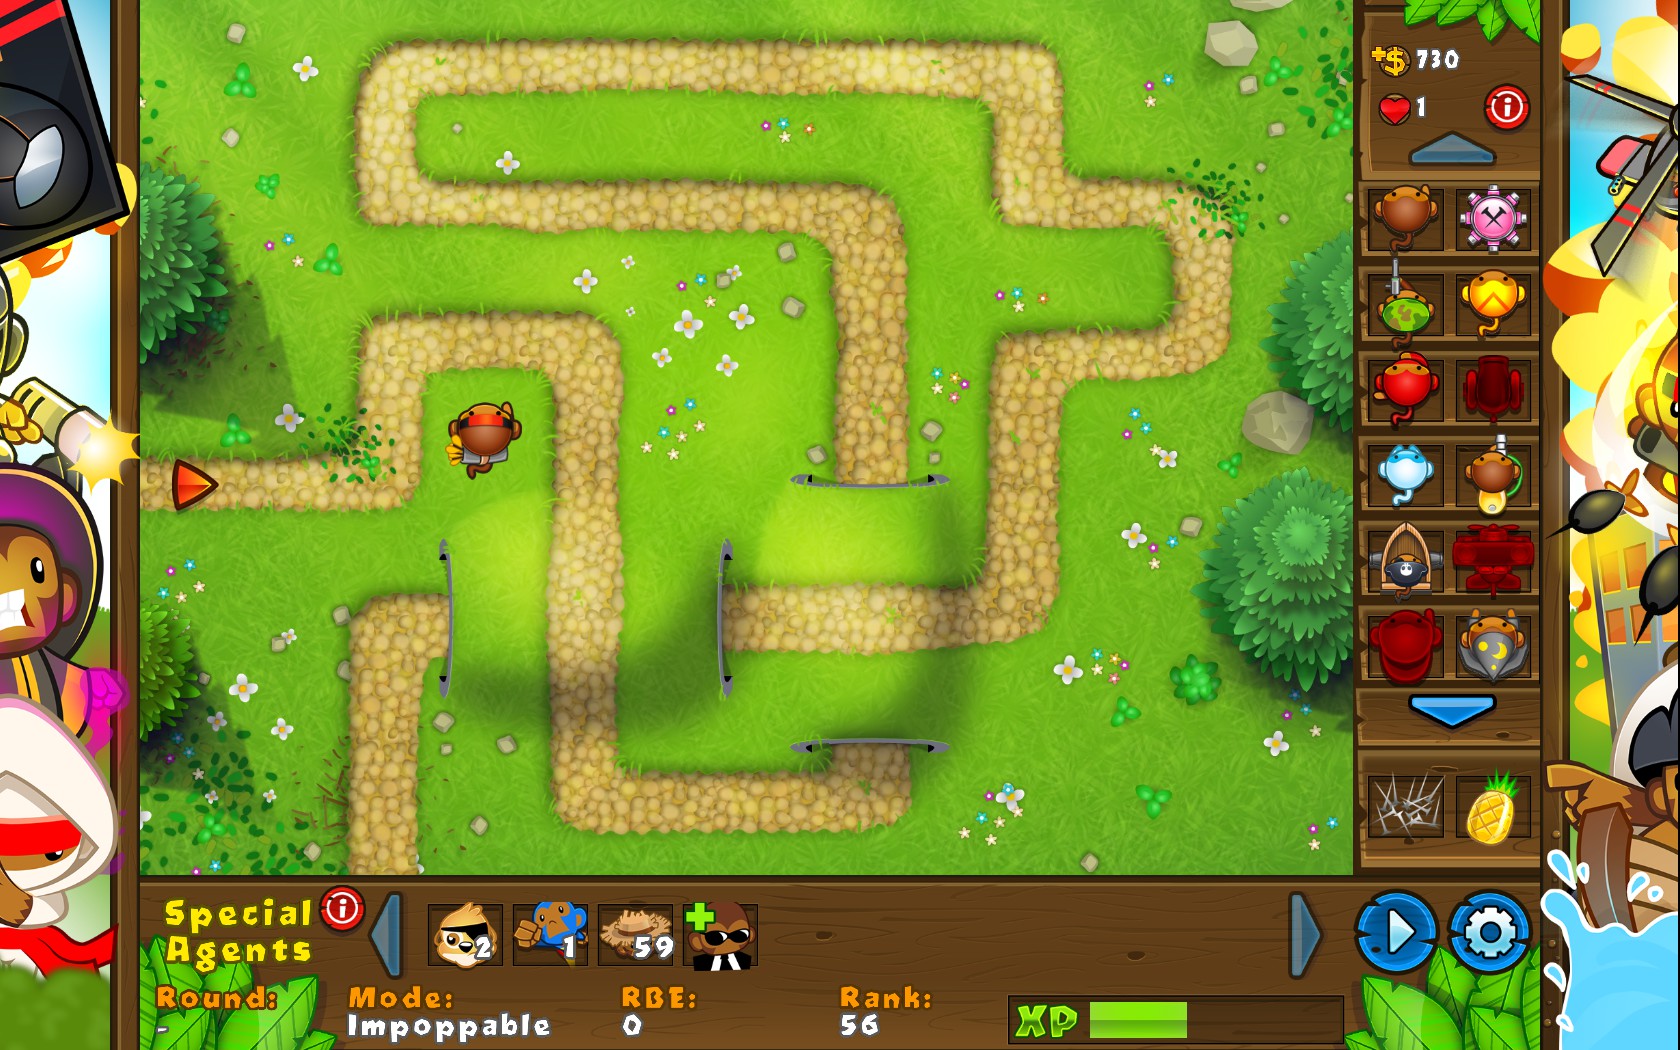 Bloons Tower Defense 5 Strategy